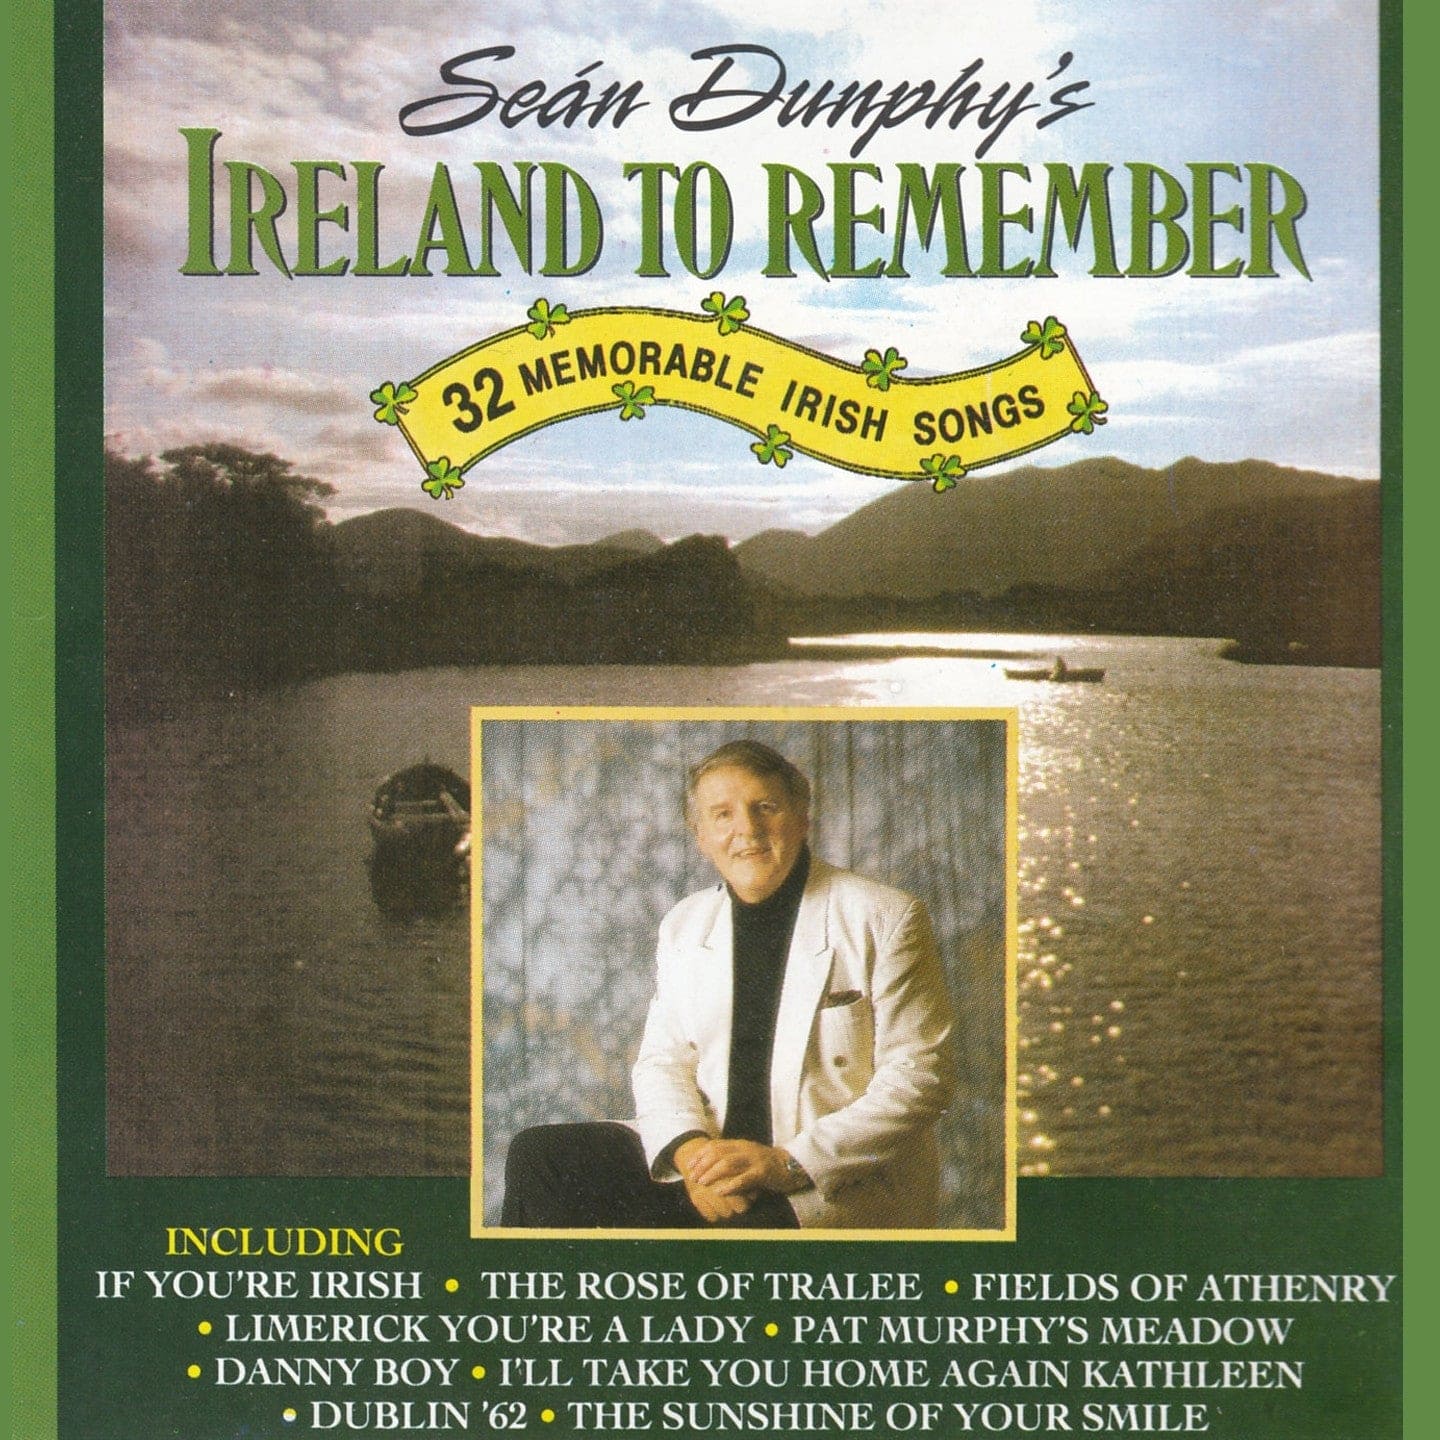 Ireland To Remember - Sean Dunphy [CD]